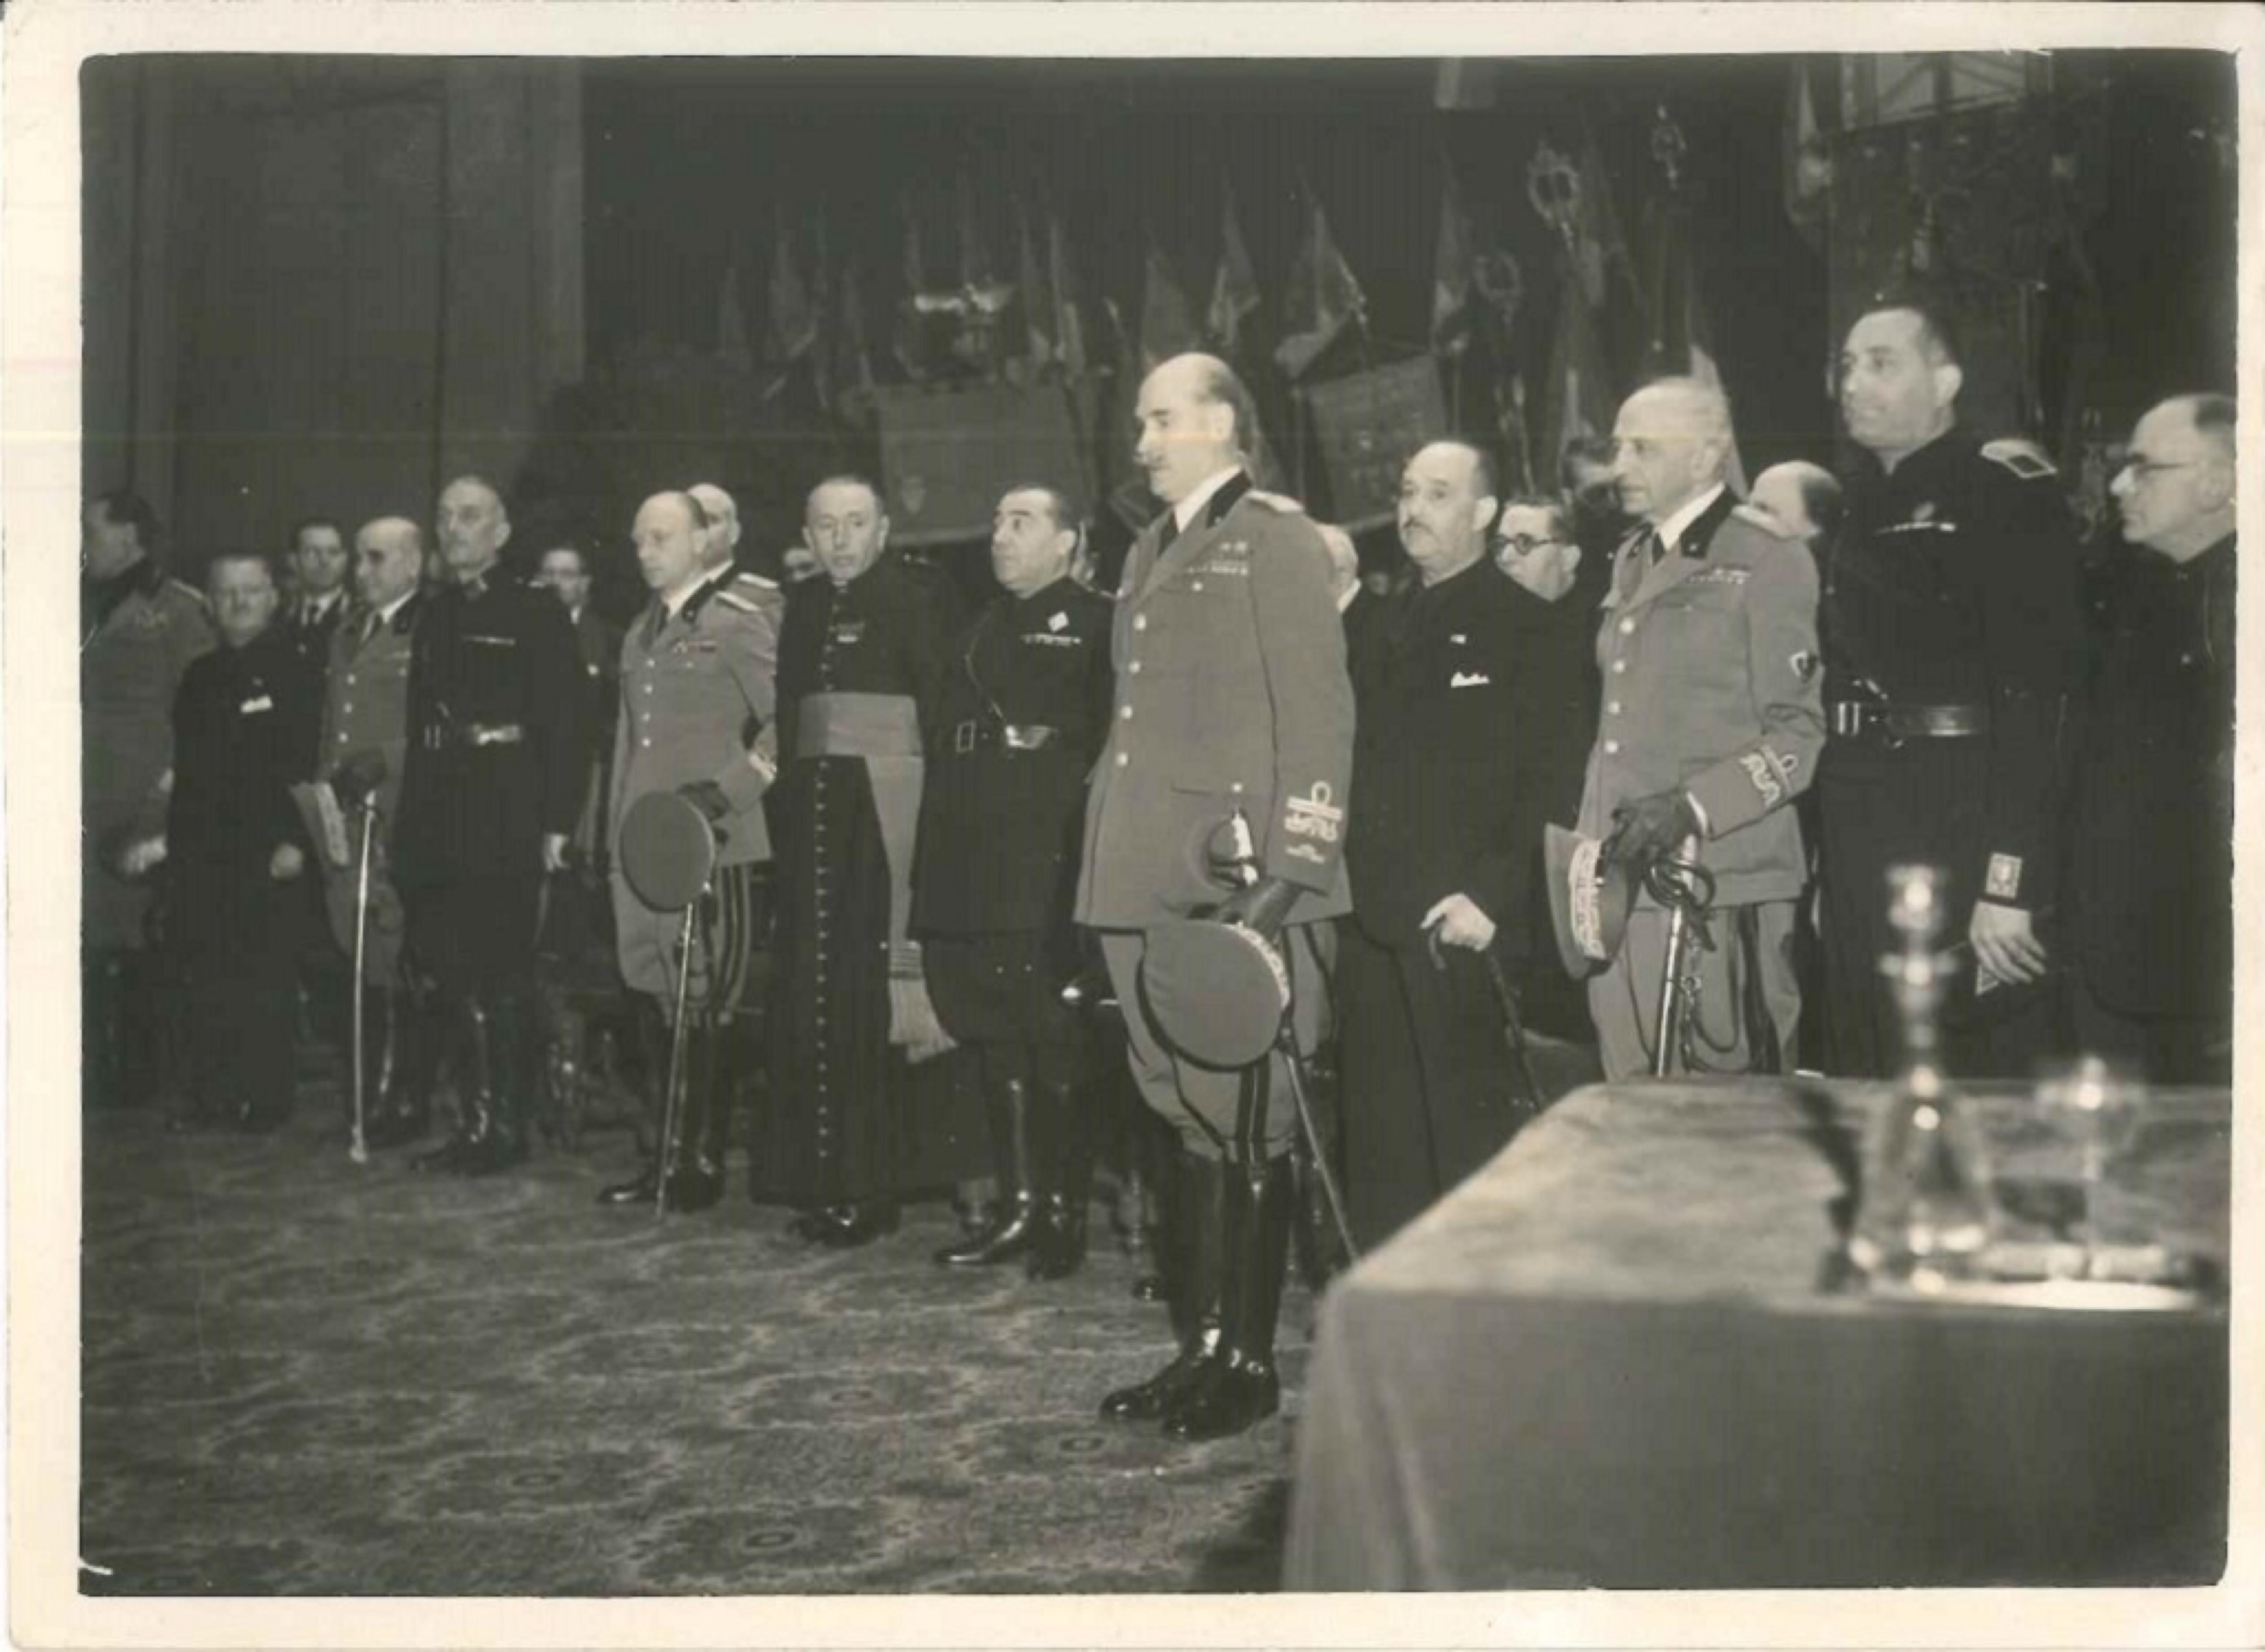 Unknown Portrait Photograph - Authorities in Italy during Fascism - Vintage Photo - 1930s